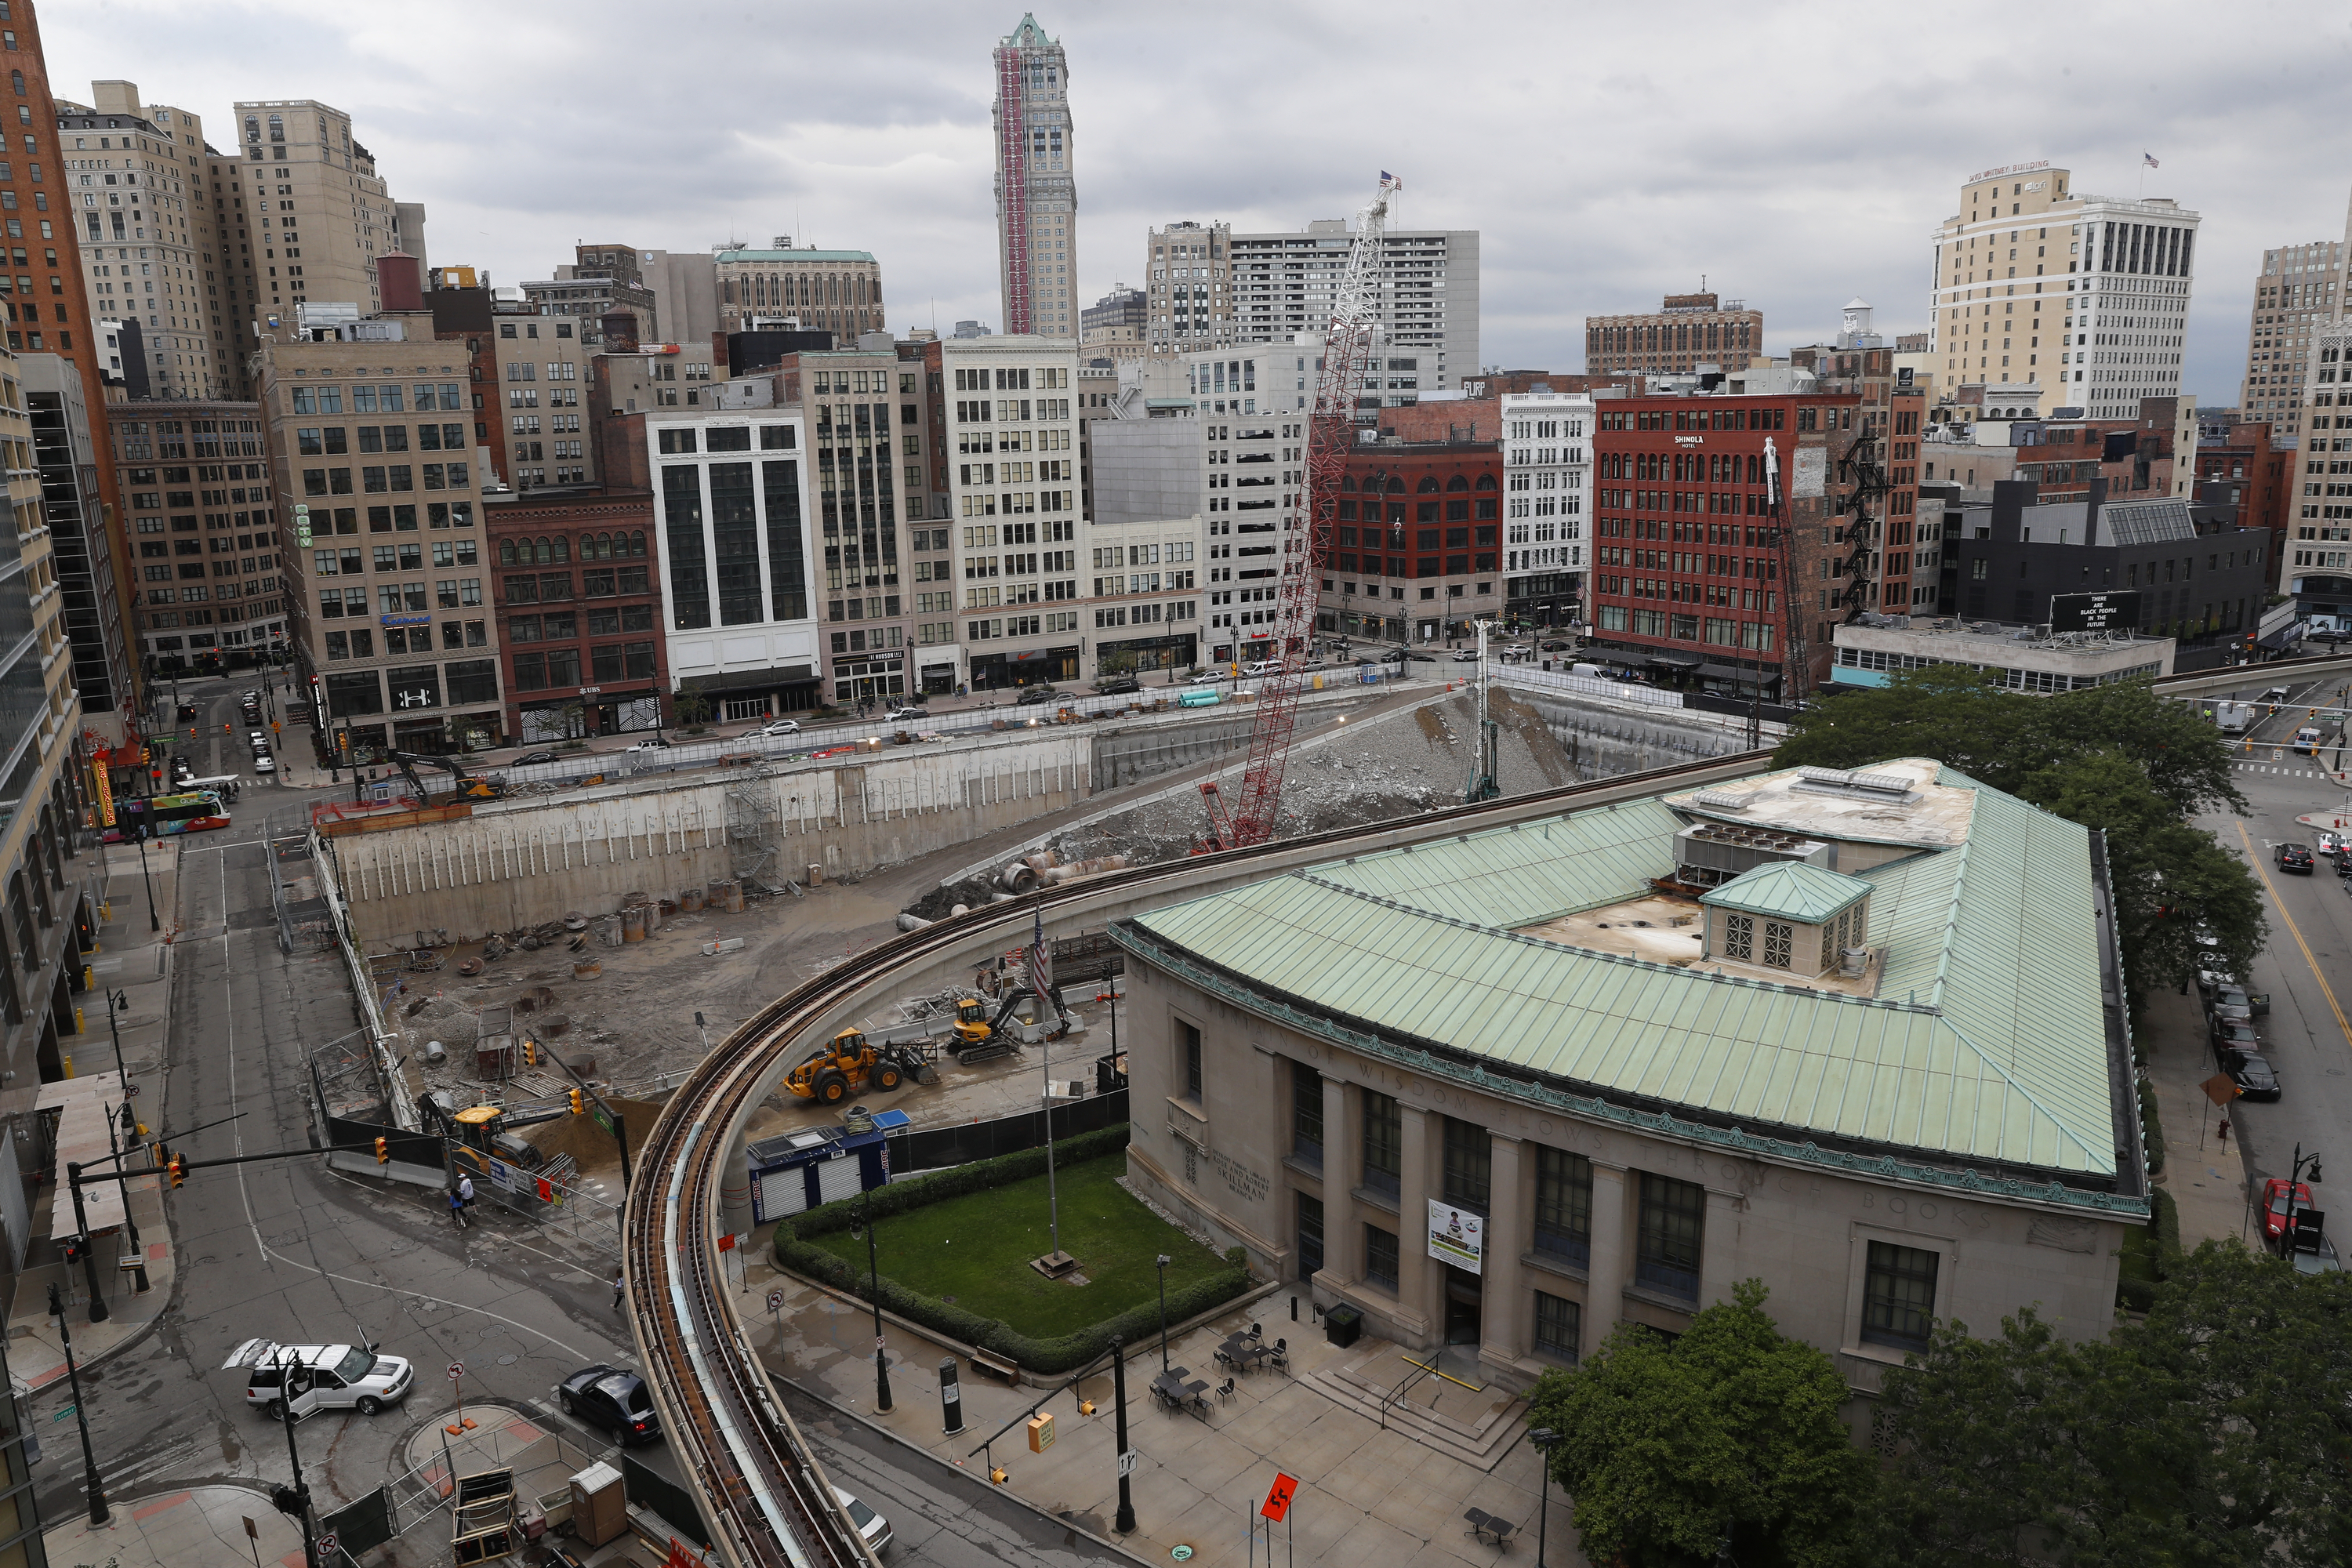 A high view of a rectangular construction site where a foundation is being built below ground. In the foreground is a triangular-shaped building with a copper roof. The background is filled with tall buildings.